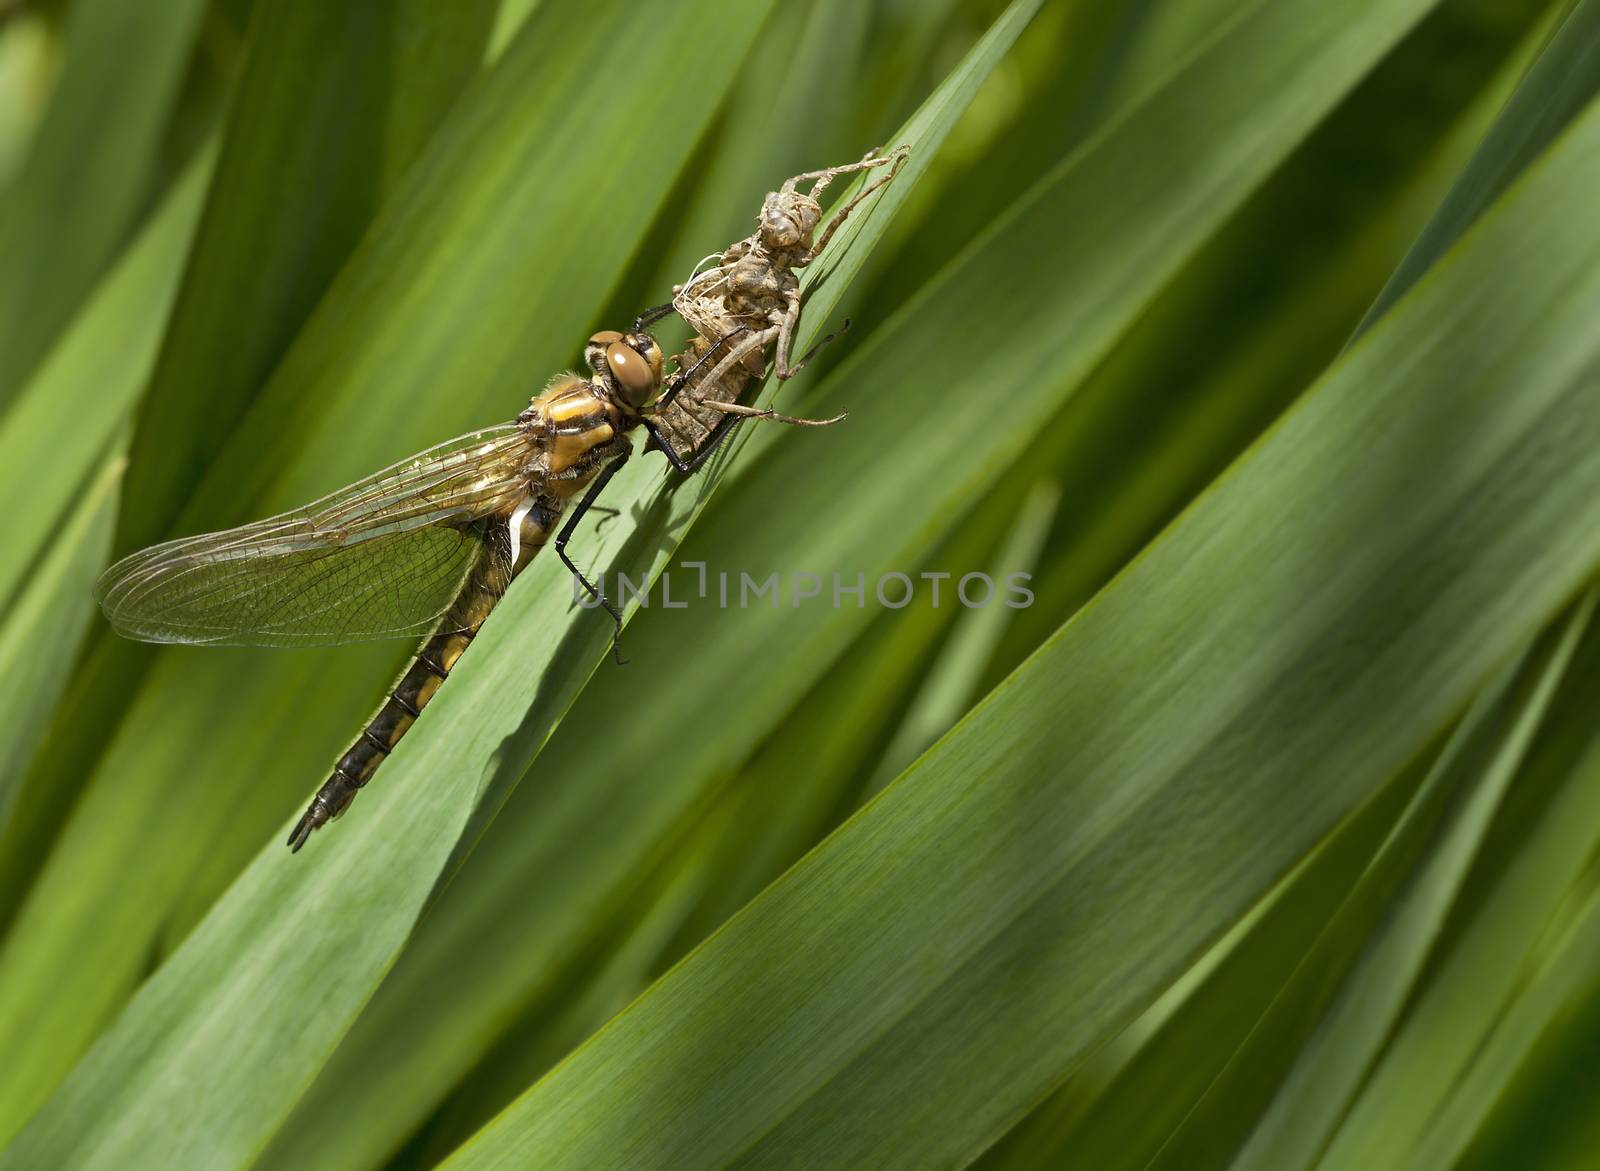 Dragonfly on the grass.